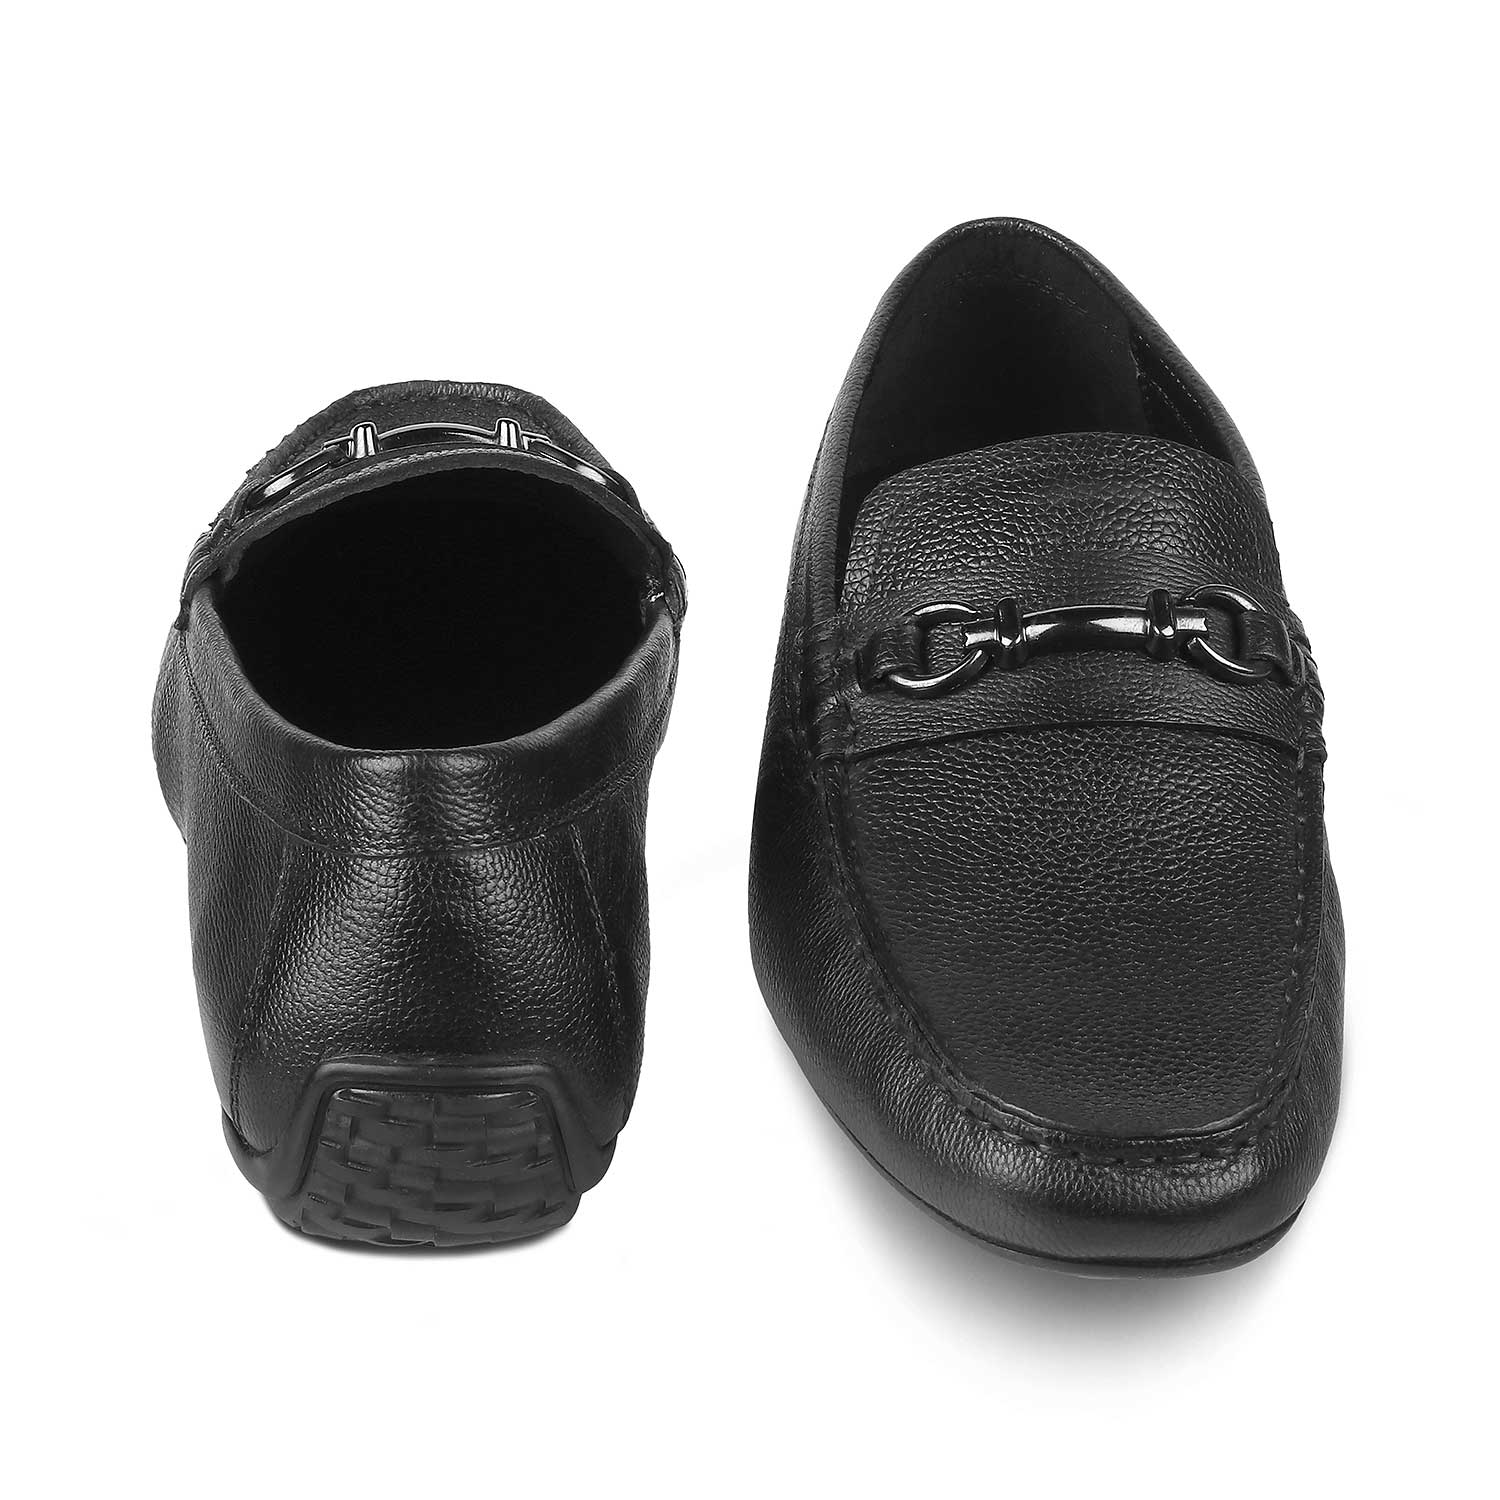 The Sandee Black Men's Leather Driving Loafers Tresmode - Tresmode